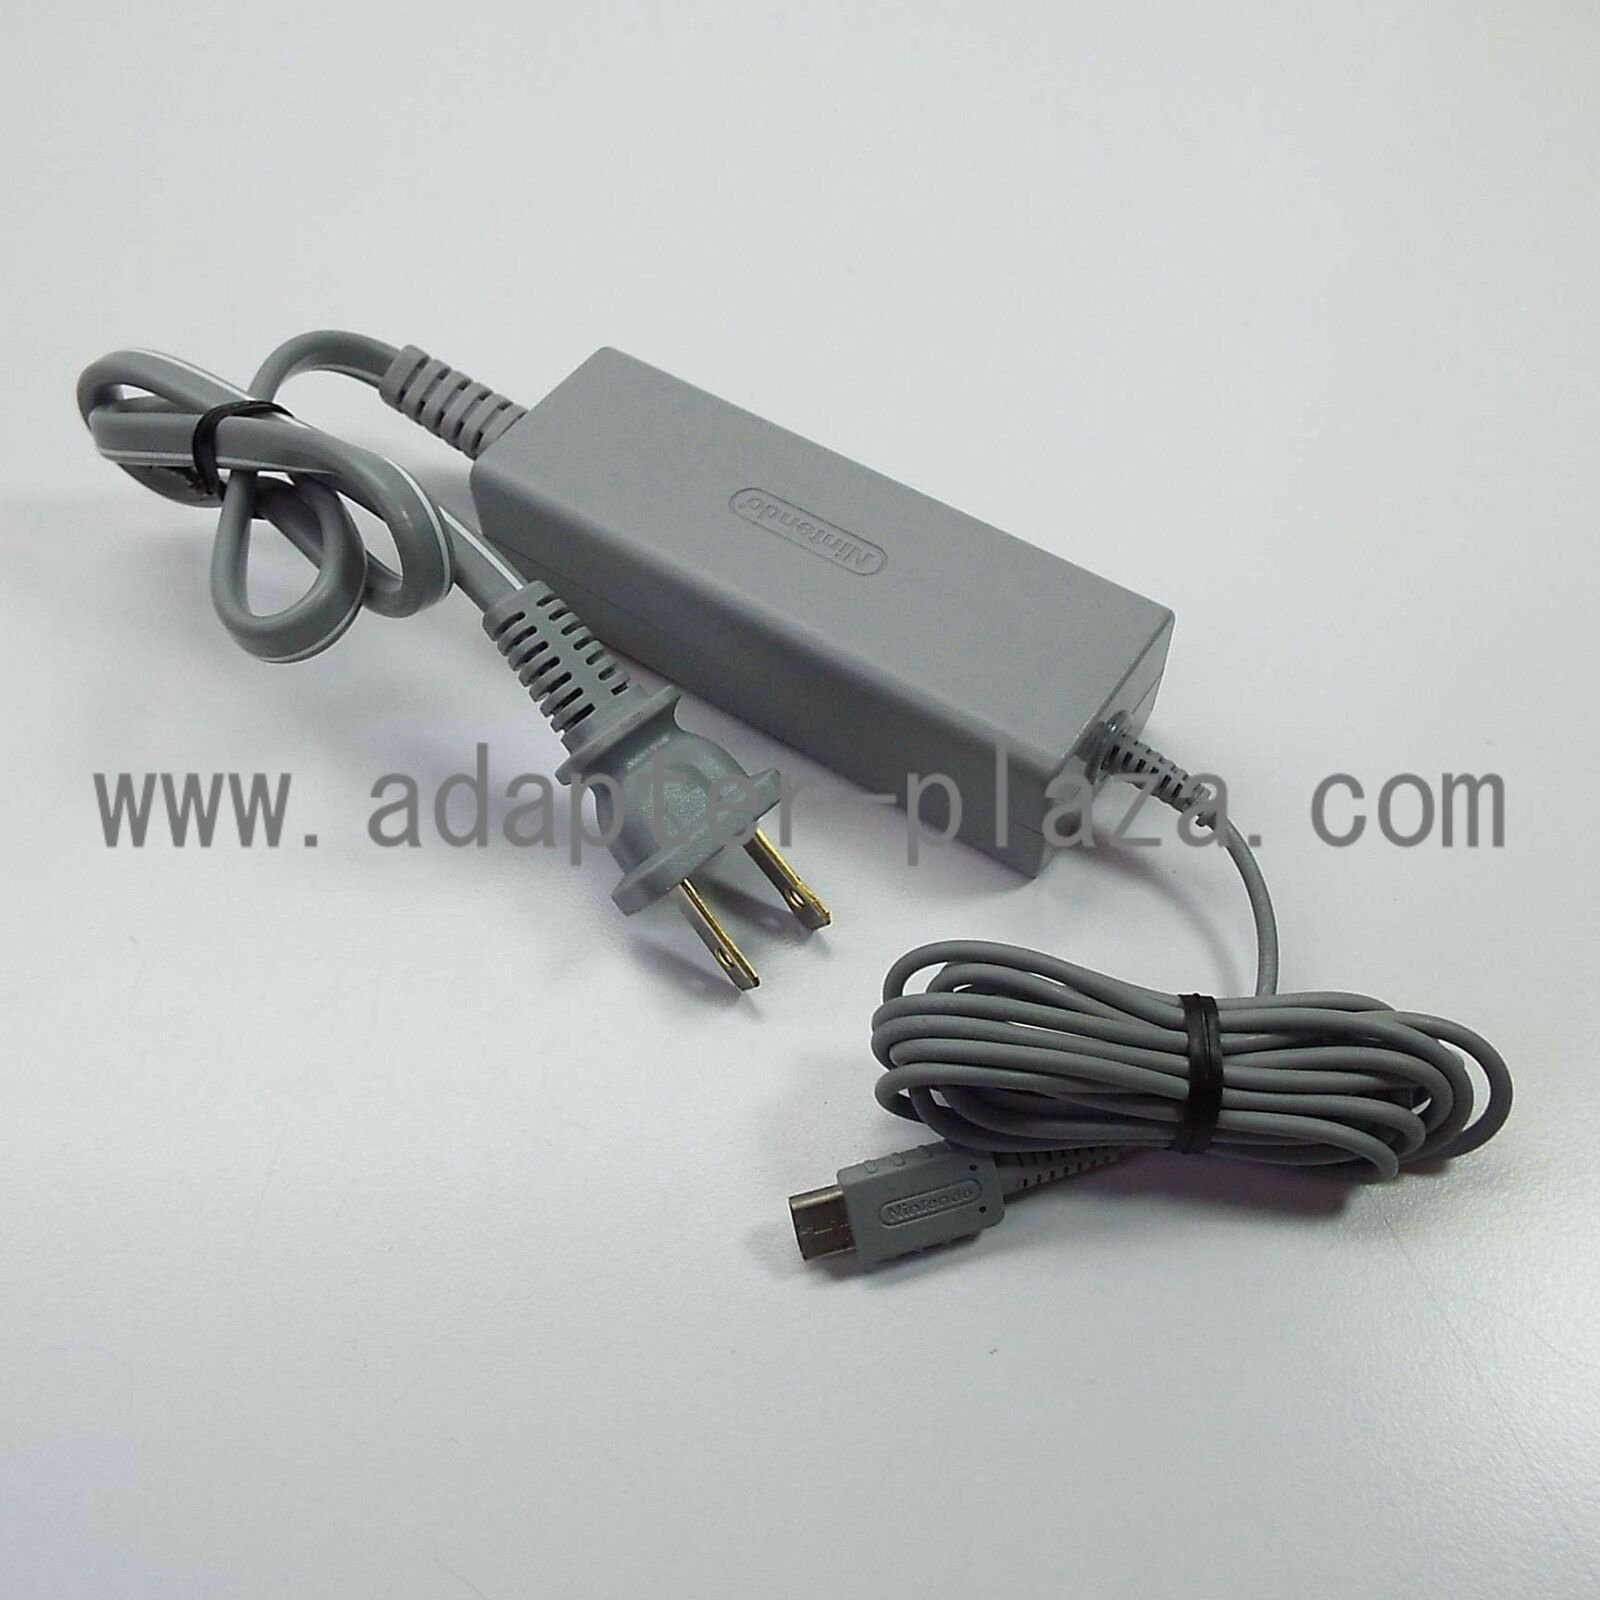 *Brand NEW* WUP-011 4.75V 1.6A AC DC Adapter POWER SUPPLY - Click Image to Close